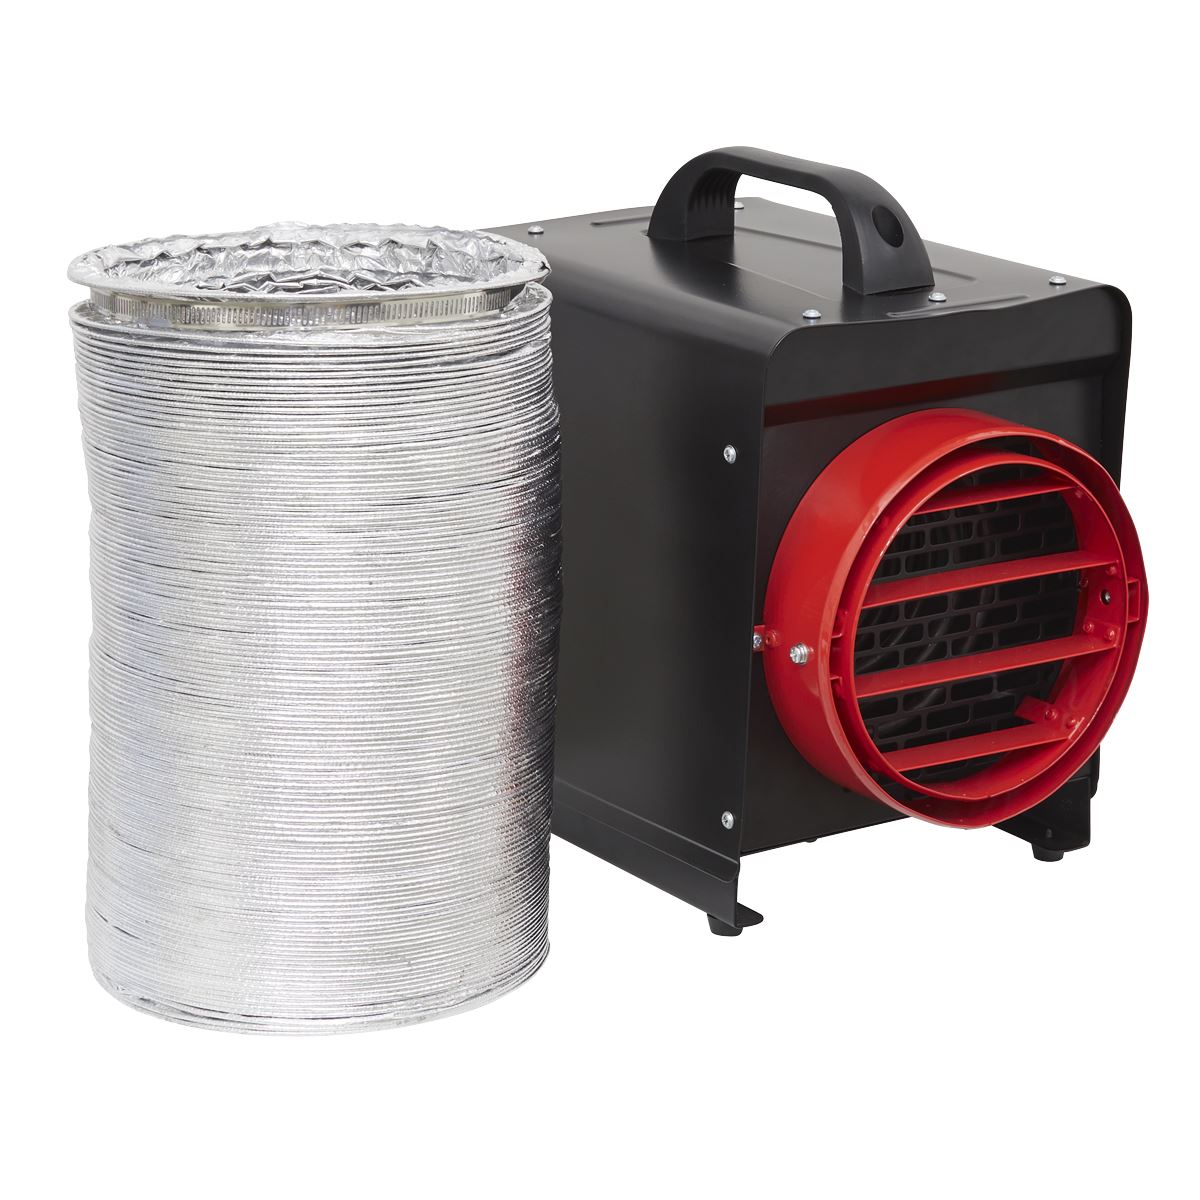 Sealey Industrial Fan Heater 3kW with Ducting